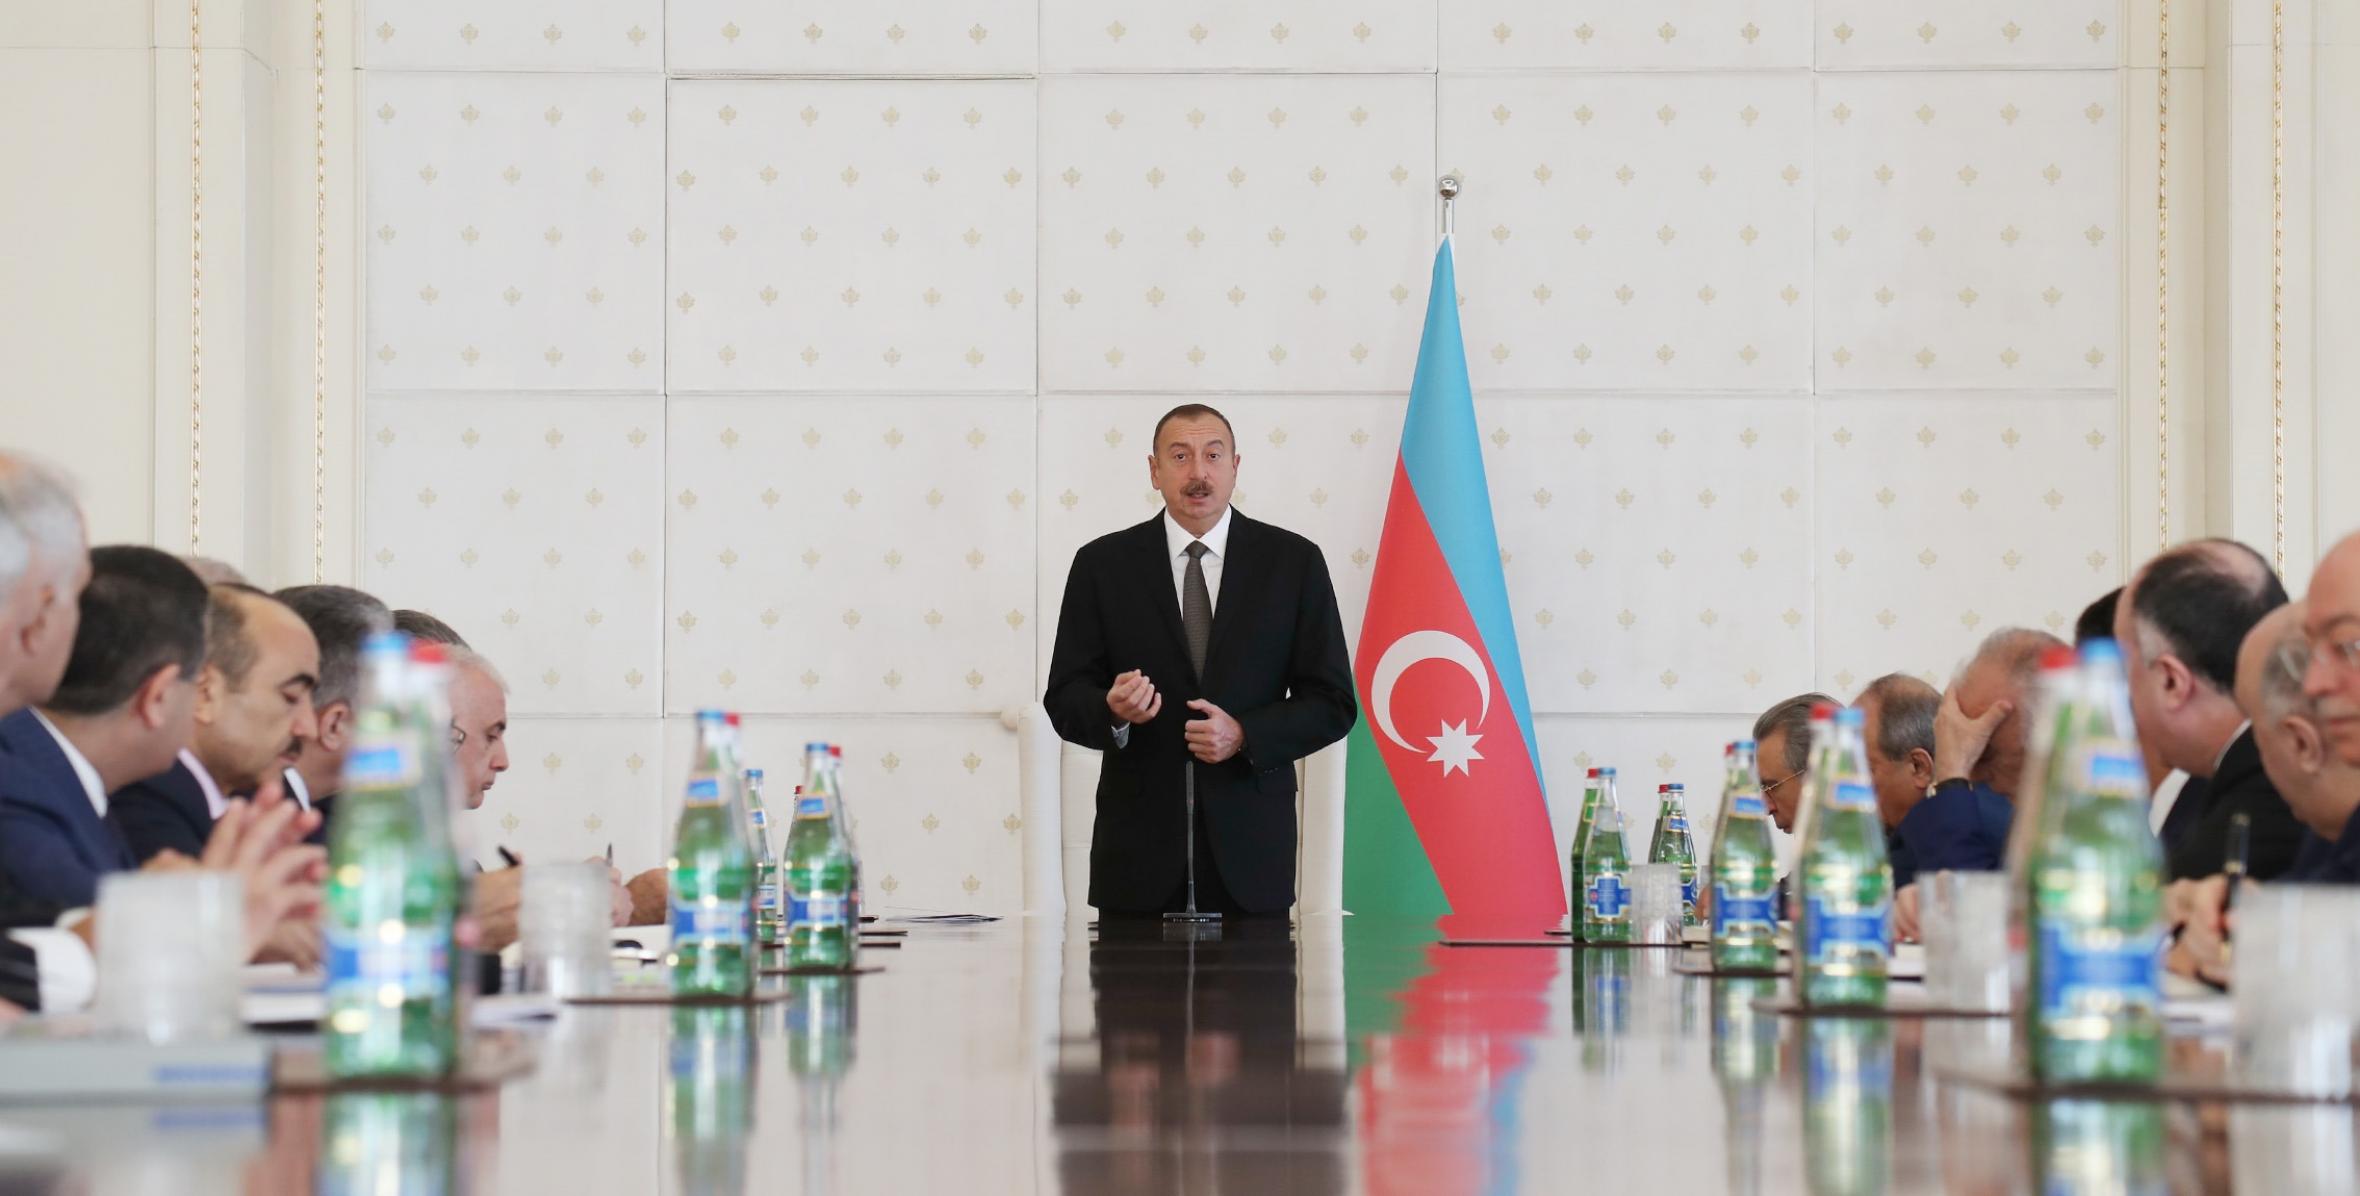 Opening speech by Ilham Aliyev at the meeting of Cabinet of Ministers dedicated to results of socio-economic development in nine months of 2016 and future objectives